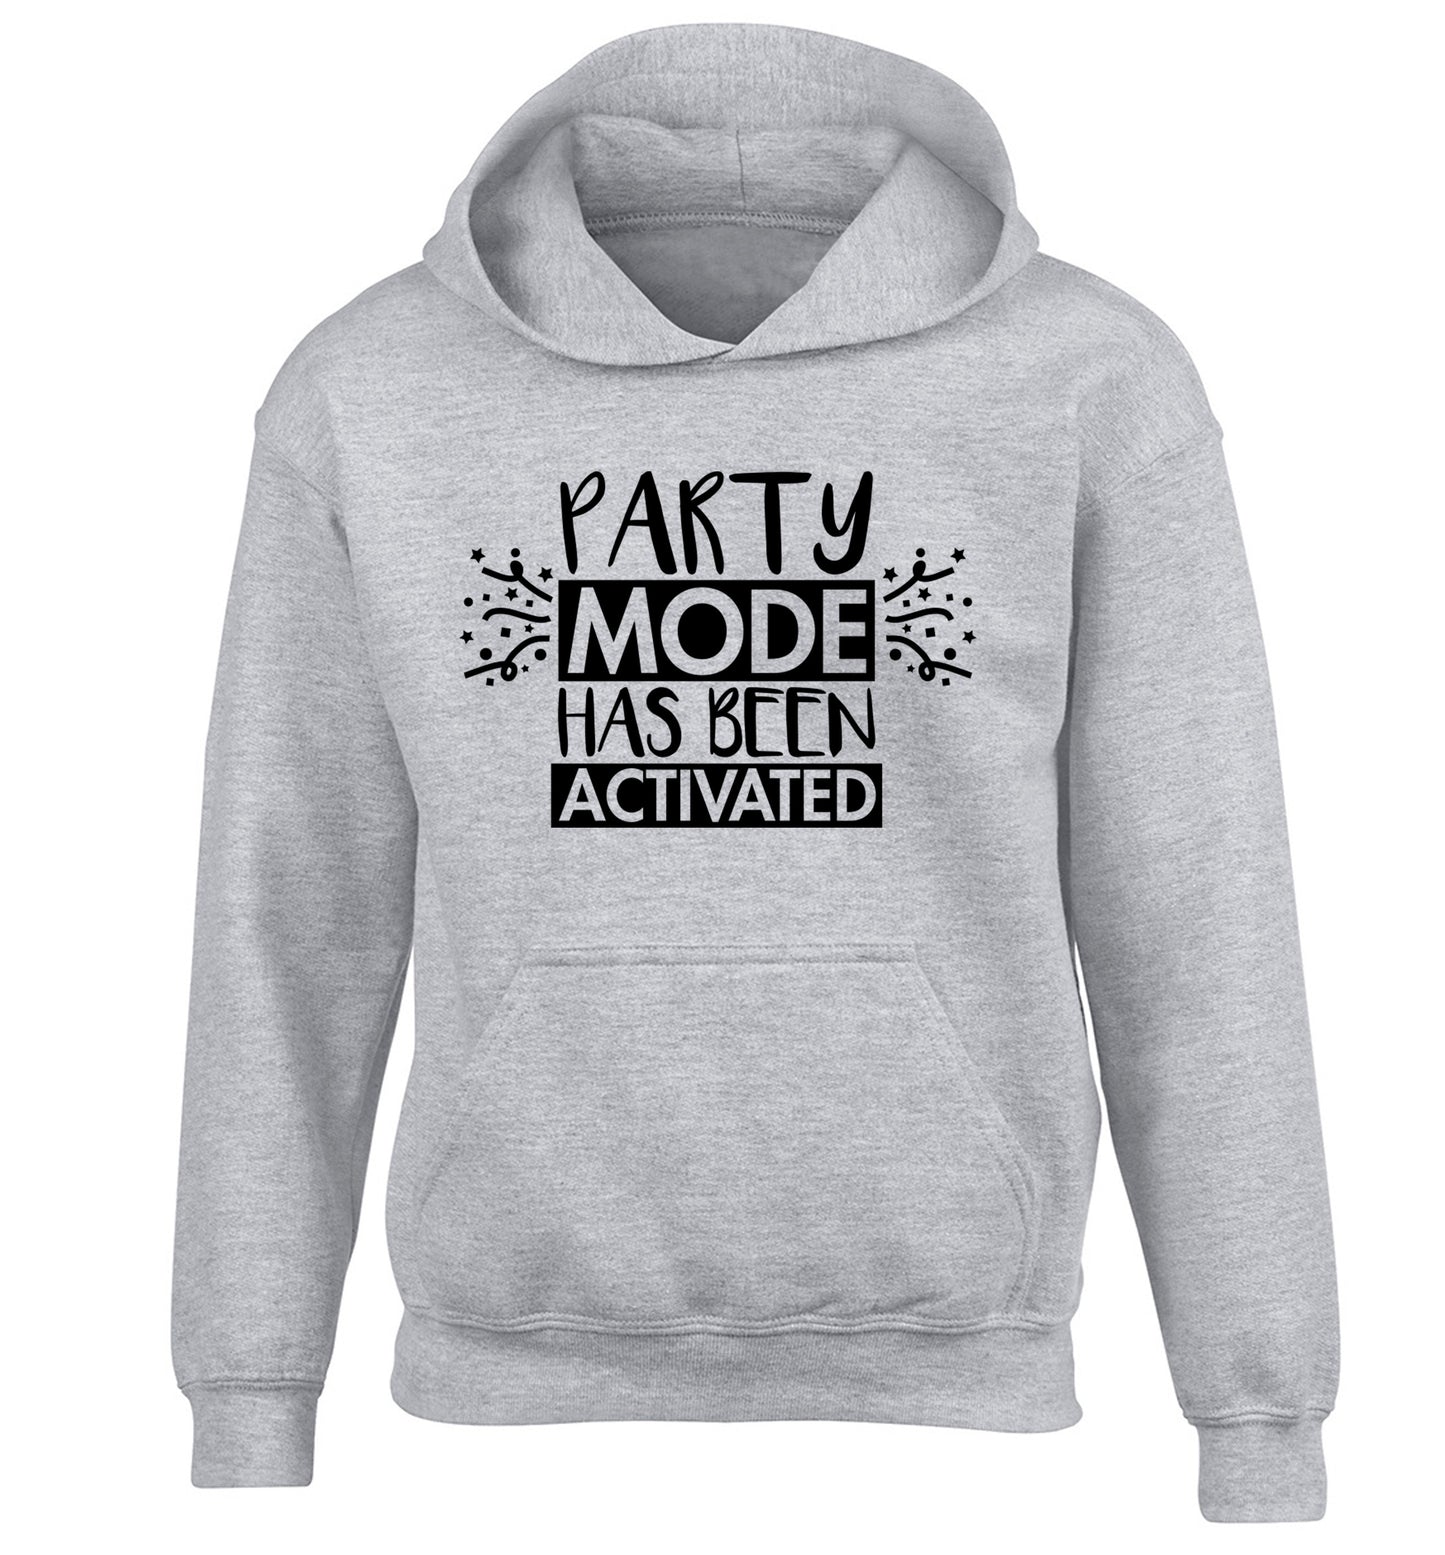 Please do not disturb party mode has been activated children's grey hoodie 12-14 Years